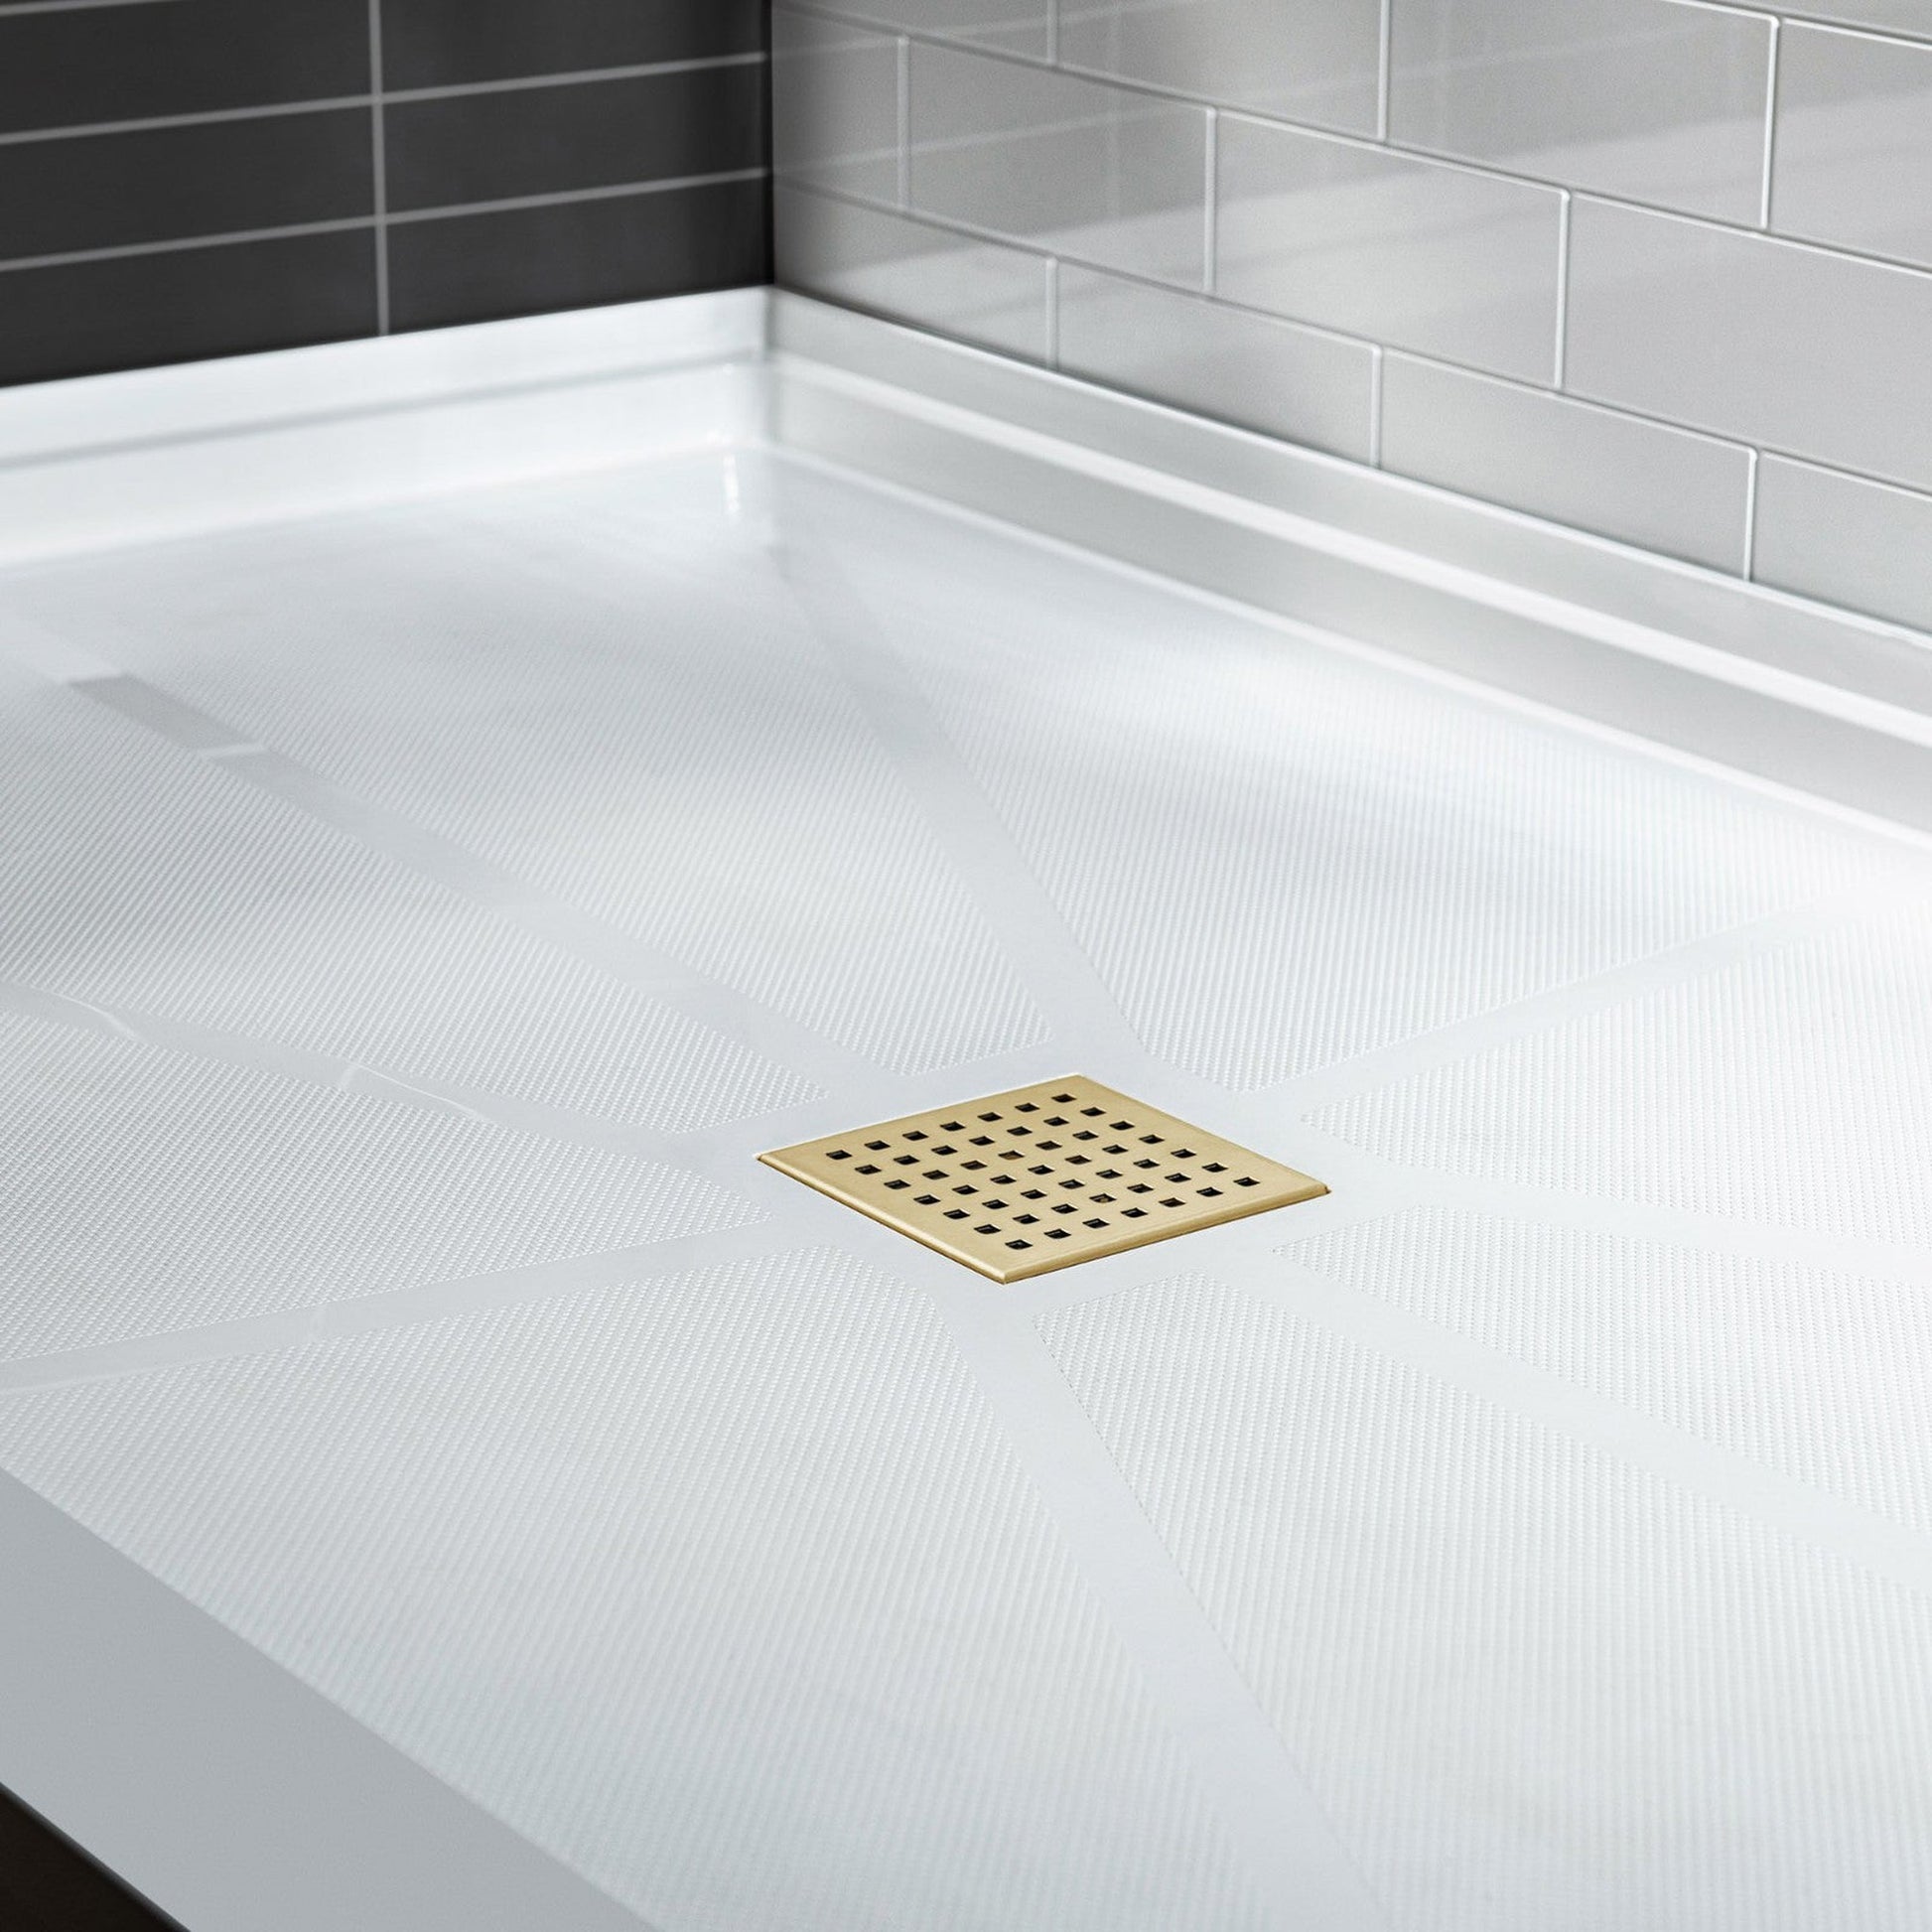 WoodBridge 60" x 36" White Solid Surface Shower Base Center Drain Location With Brushed Gold Trench Drain Cover